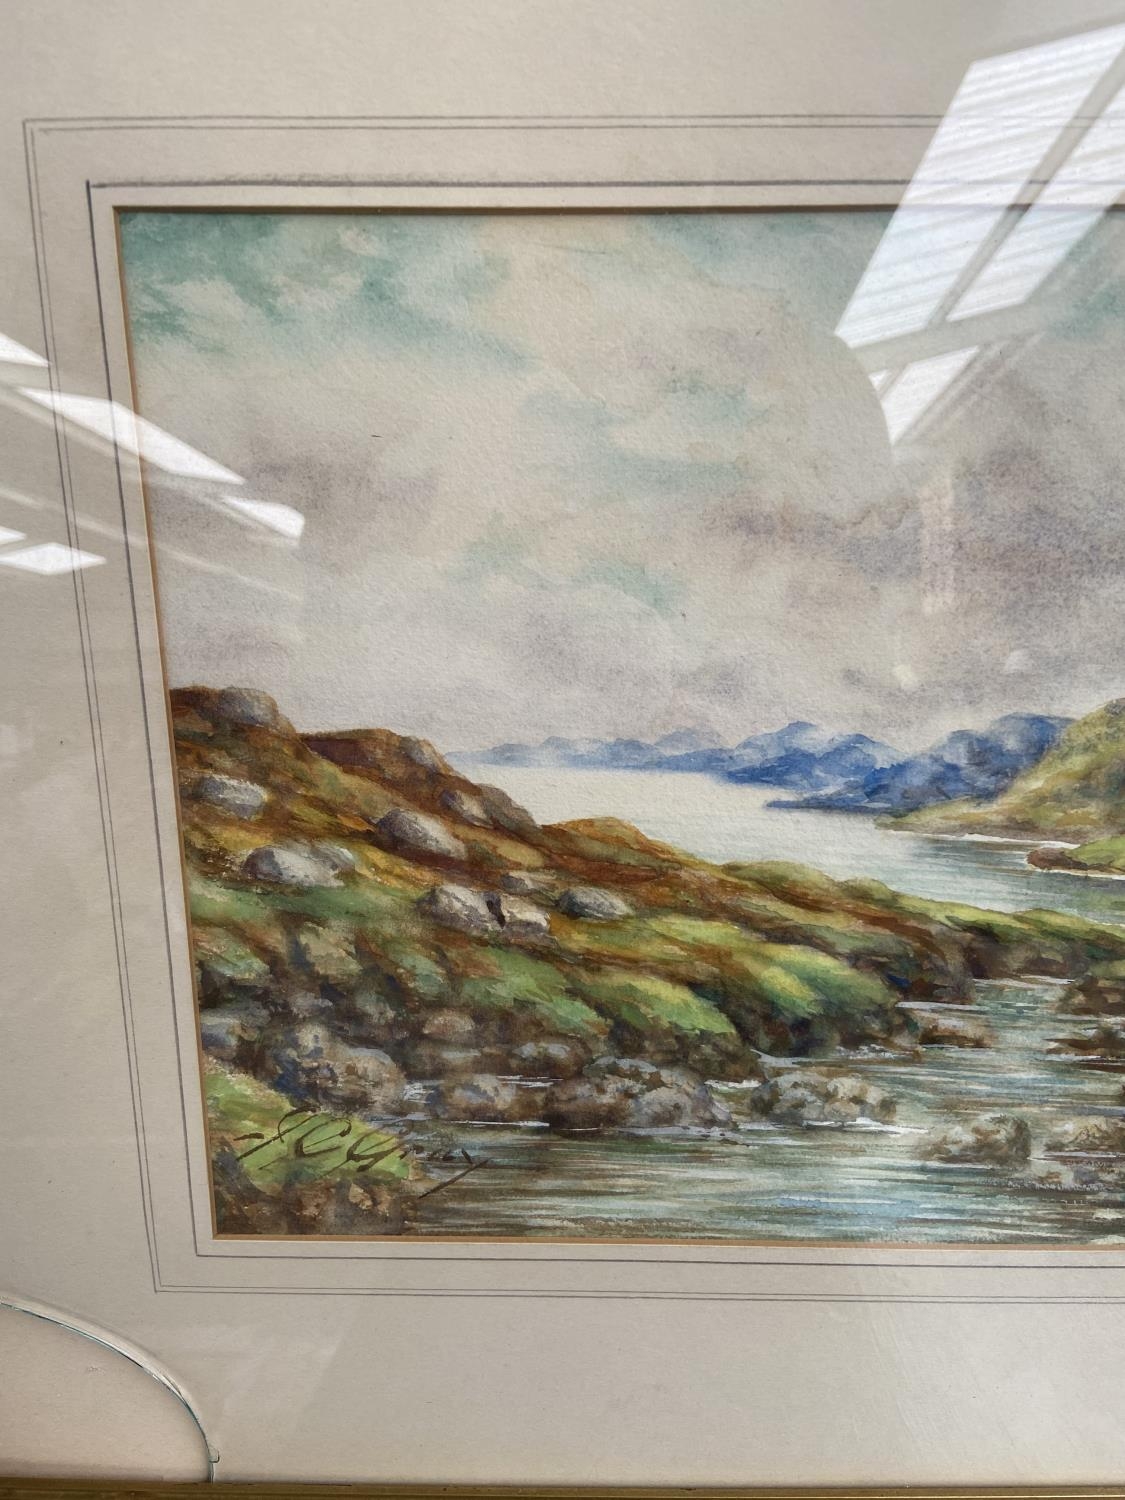 An early 20th century watercolour depicting a mountain and river landscape scene by J.C. Gray of - Image 3 of 5